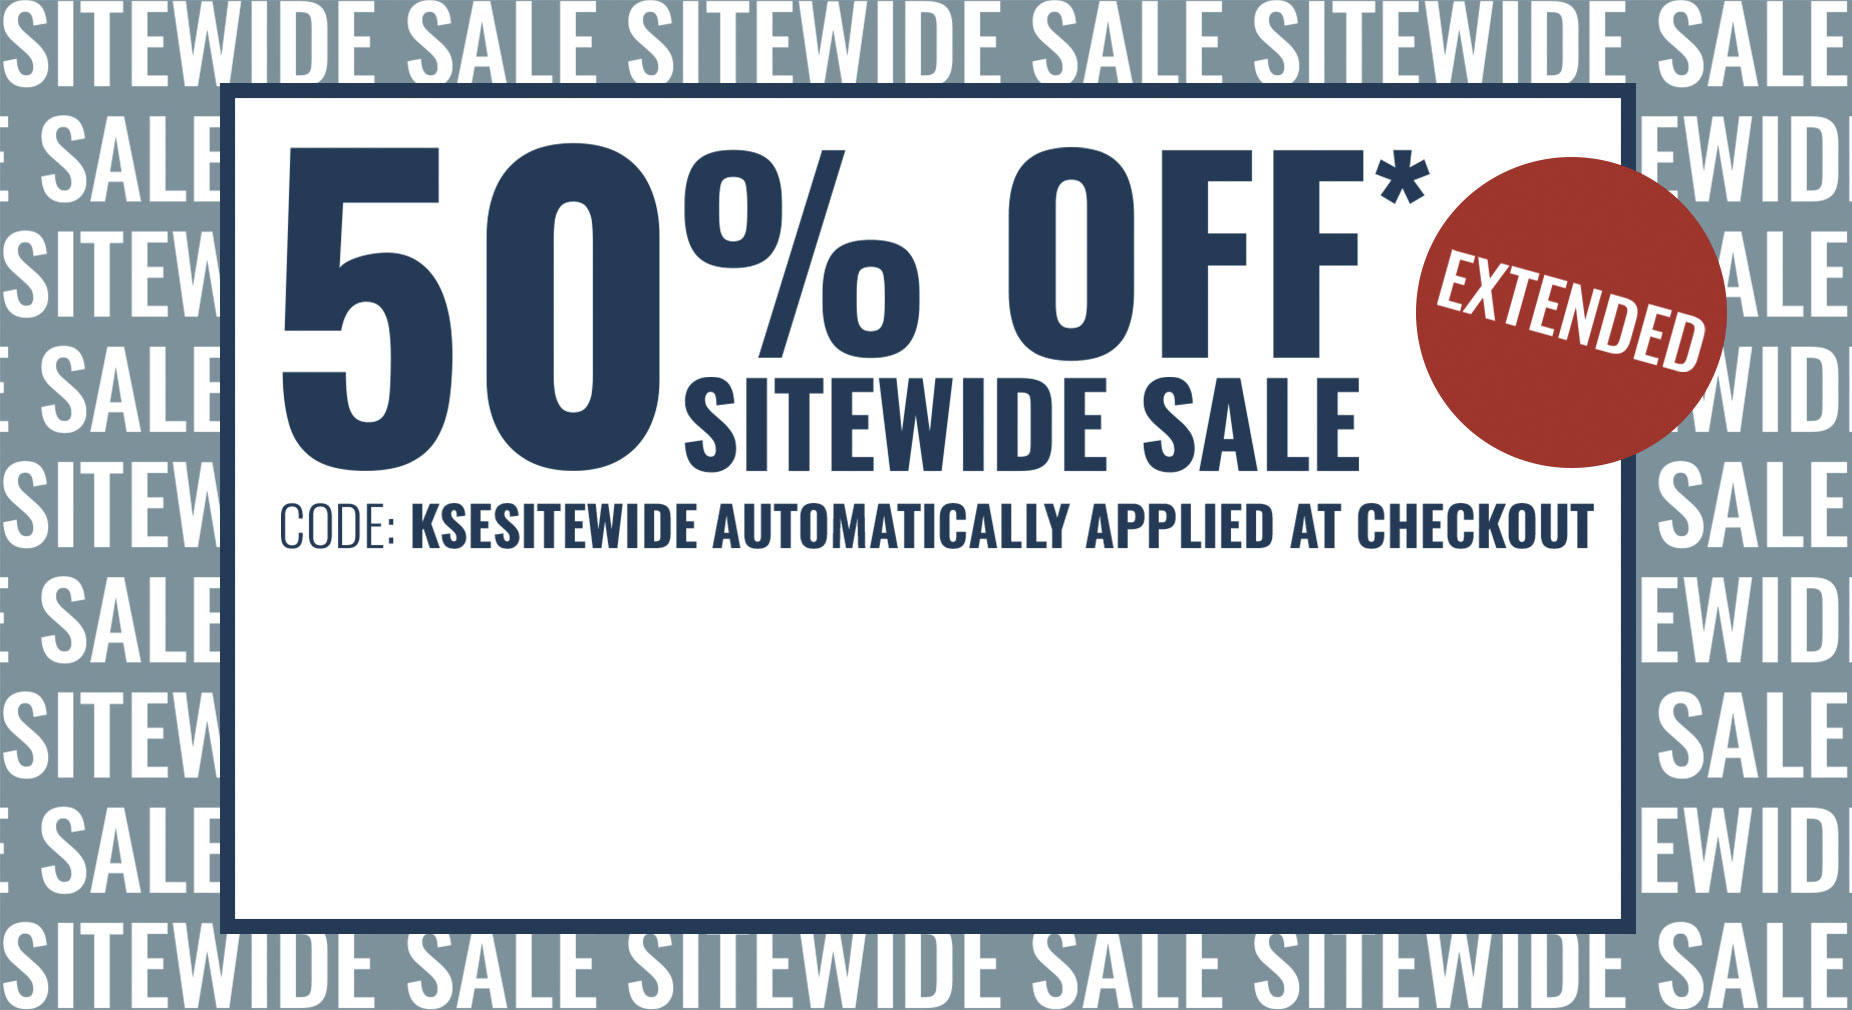 50% off* sitewide sale EXTENDED